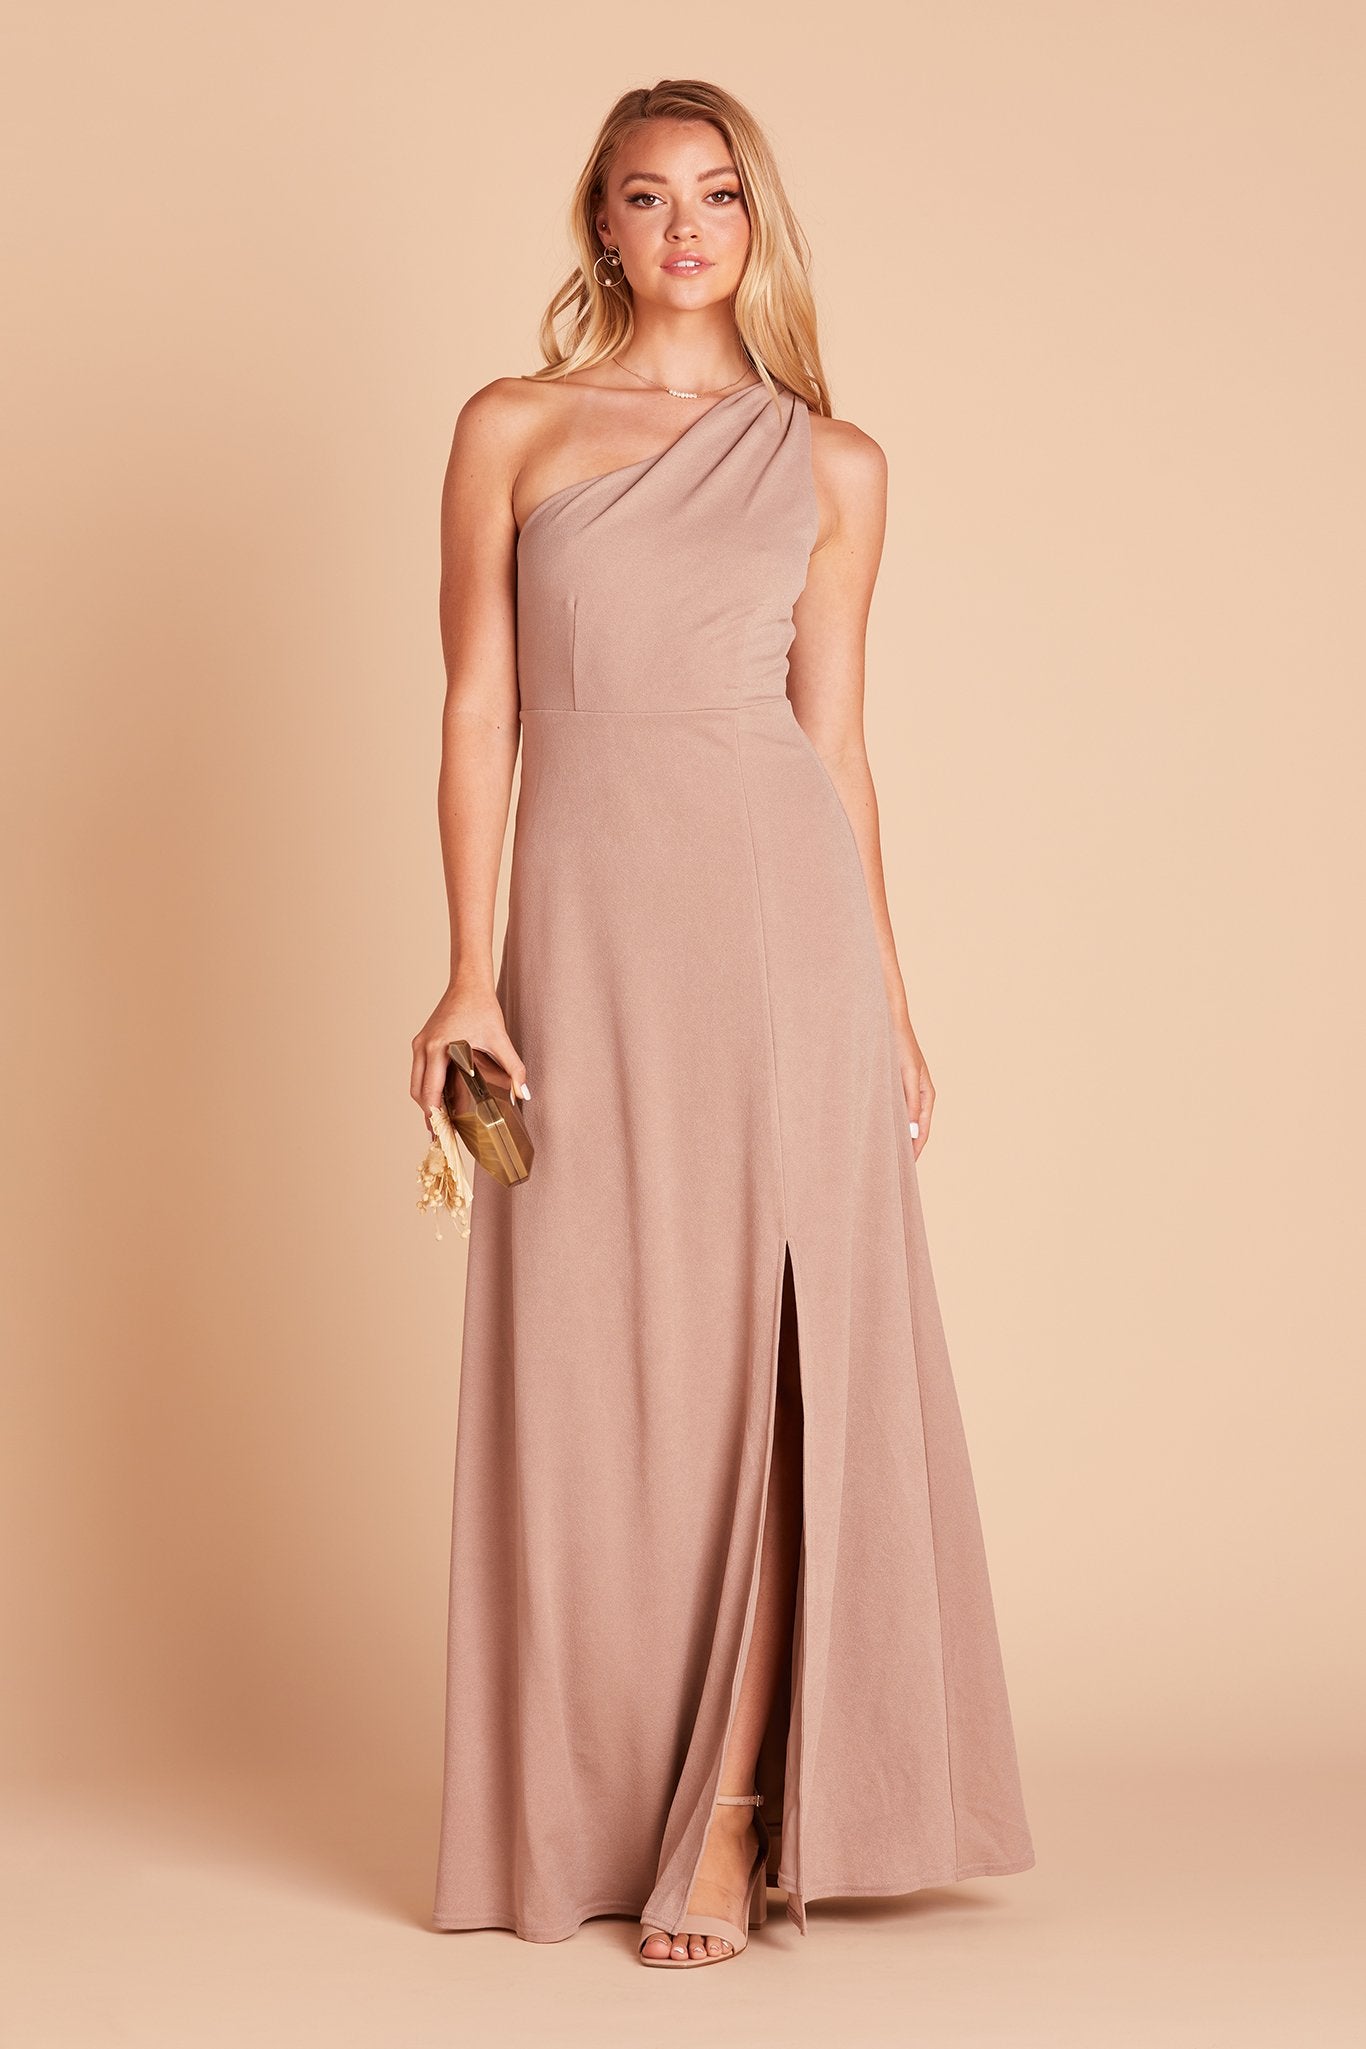 Front view of the Kira Dress in taupe crepe shows a model looking at us as they step forward revealing their lower leg. They wear the Mary High Curve Heel shoe in nude blush. 